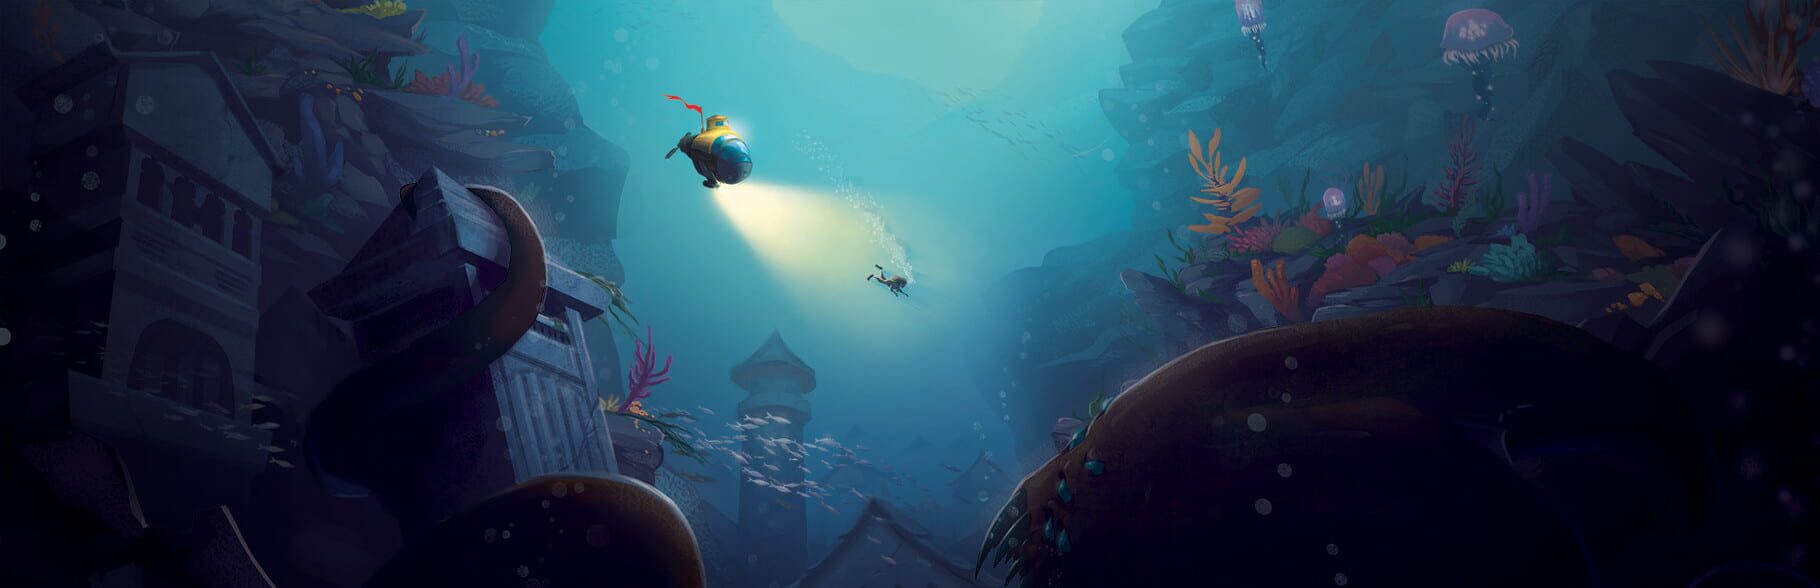 Artwork for Song of the Deep